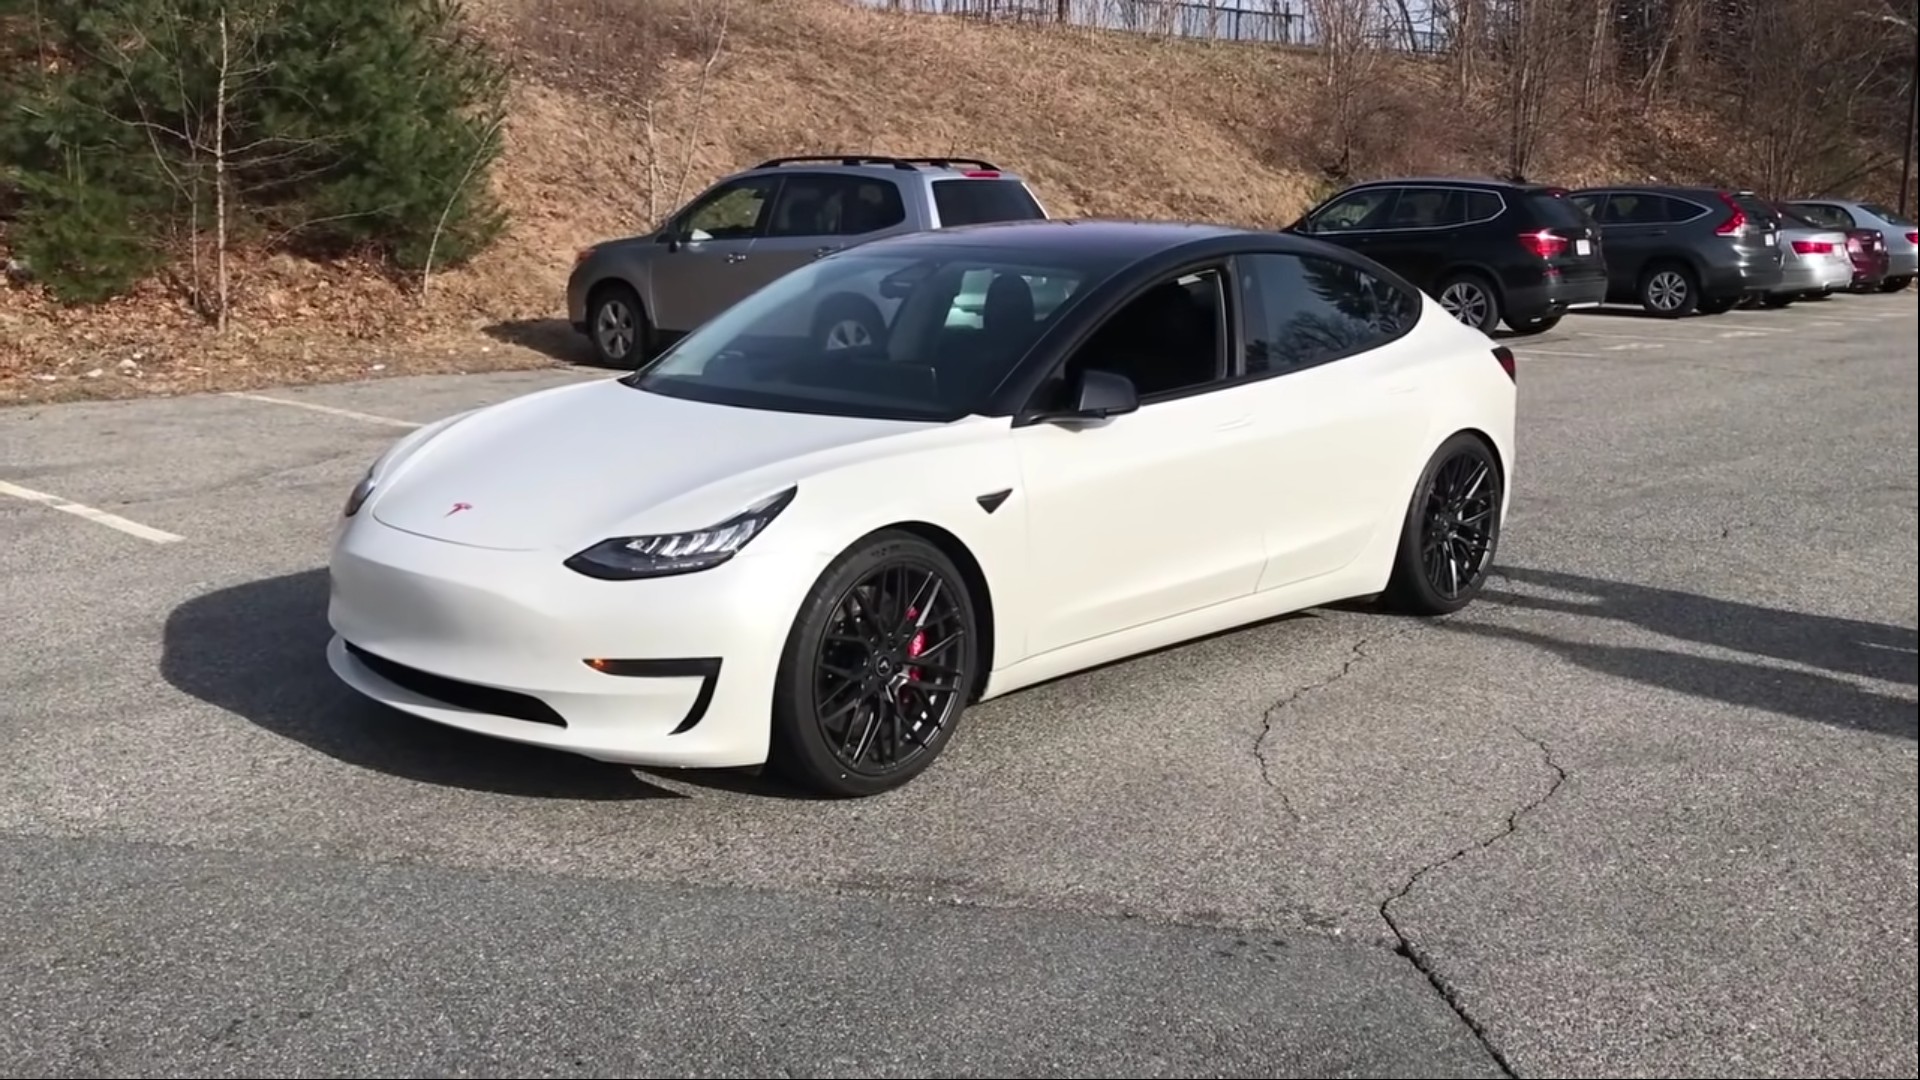 Shopping for a used Tesla? This is one 